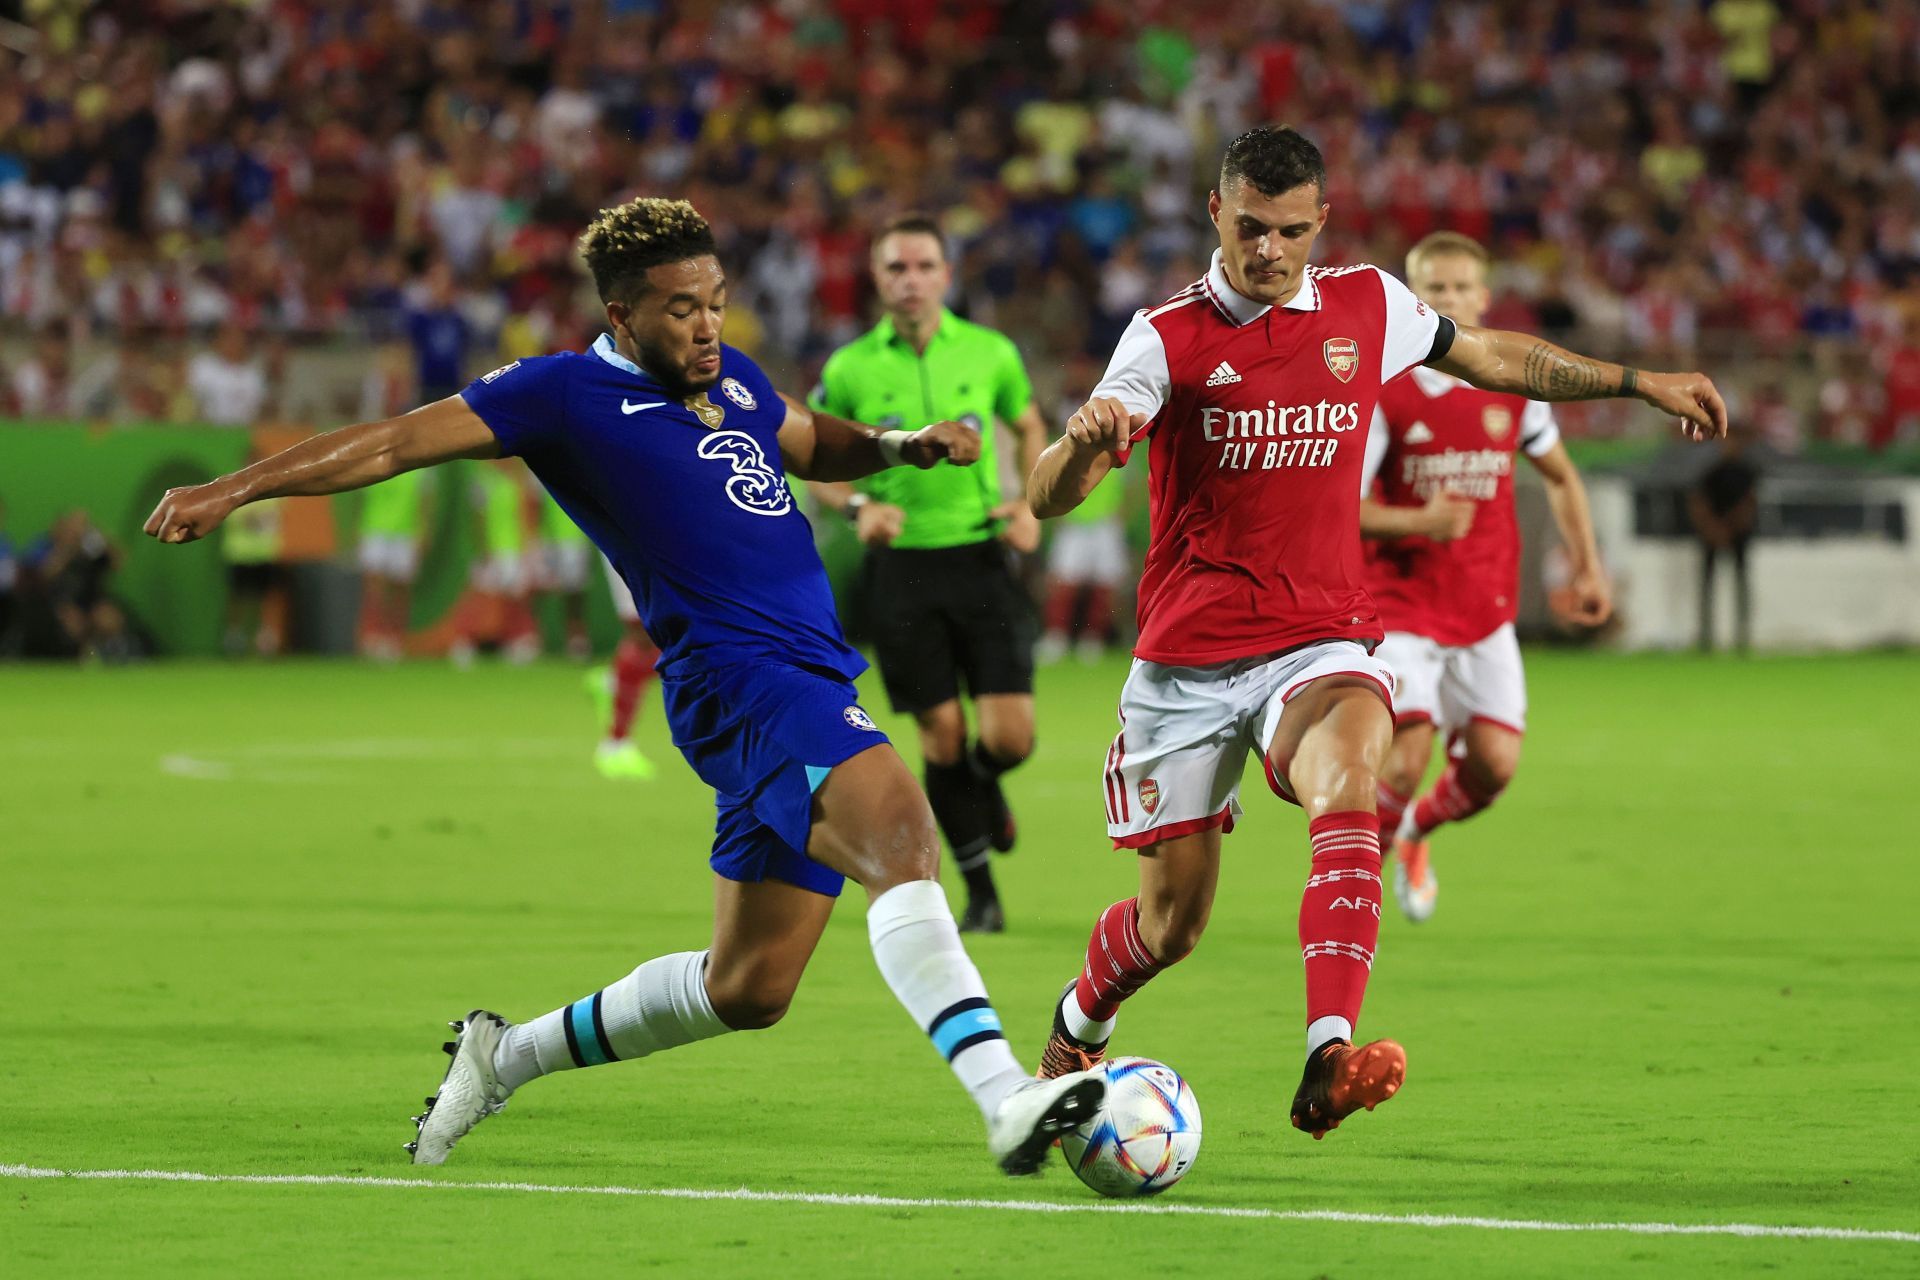 Chelsea v Arsenal - Florida Cup - Xhaka and James vying for the ball.